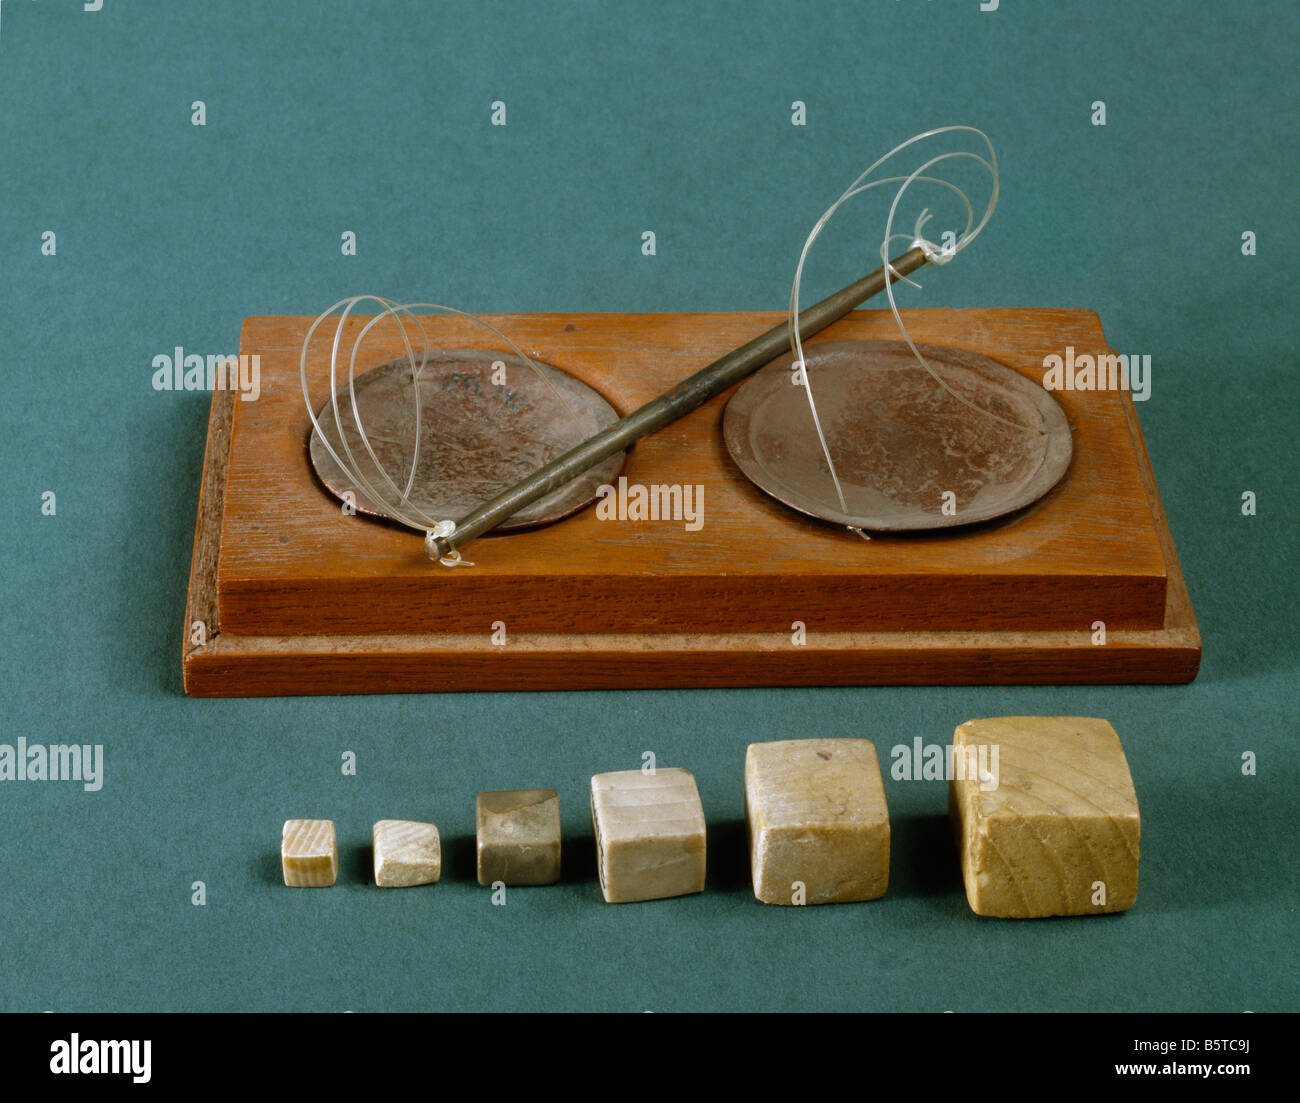 Balance scales & weights from the Indus Valley civilisation National Museum of New Delhi ref# dk 8113/2045 Stock Photo